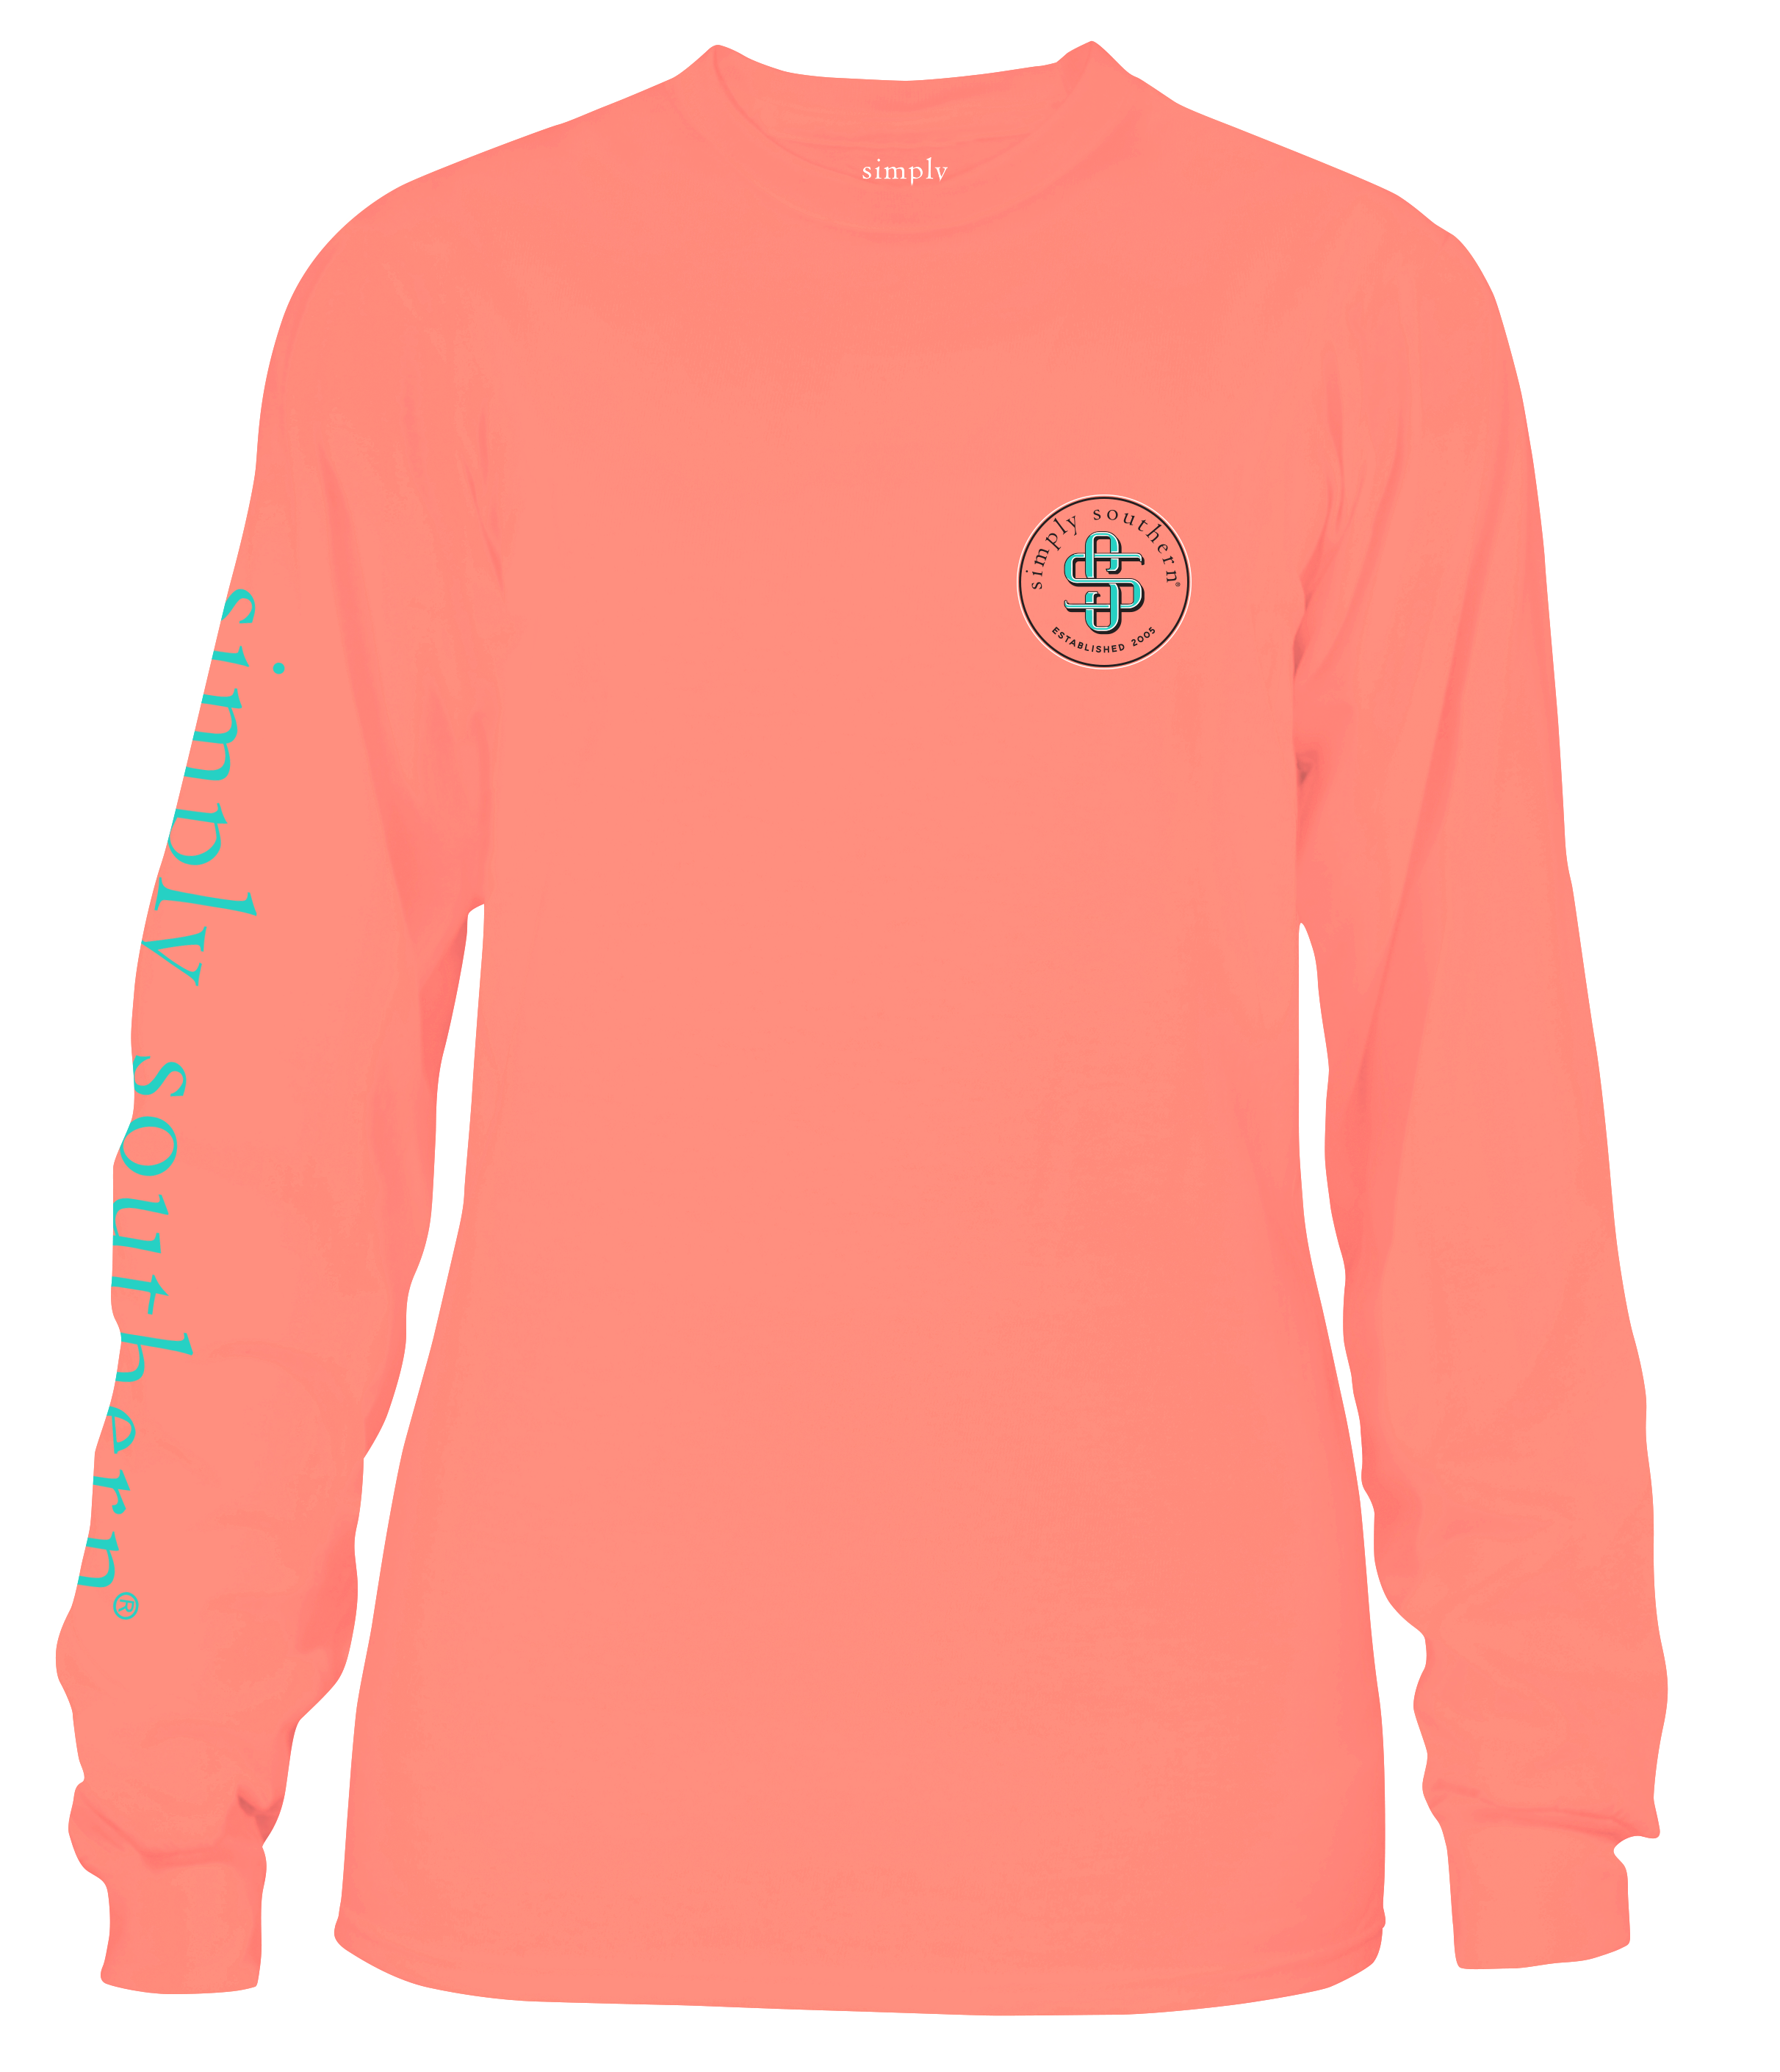 'God Is Within Her' Cowboy Long Sleeve Tee by Simply Southern